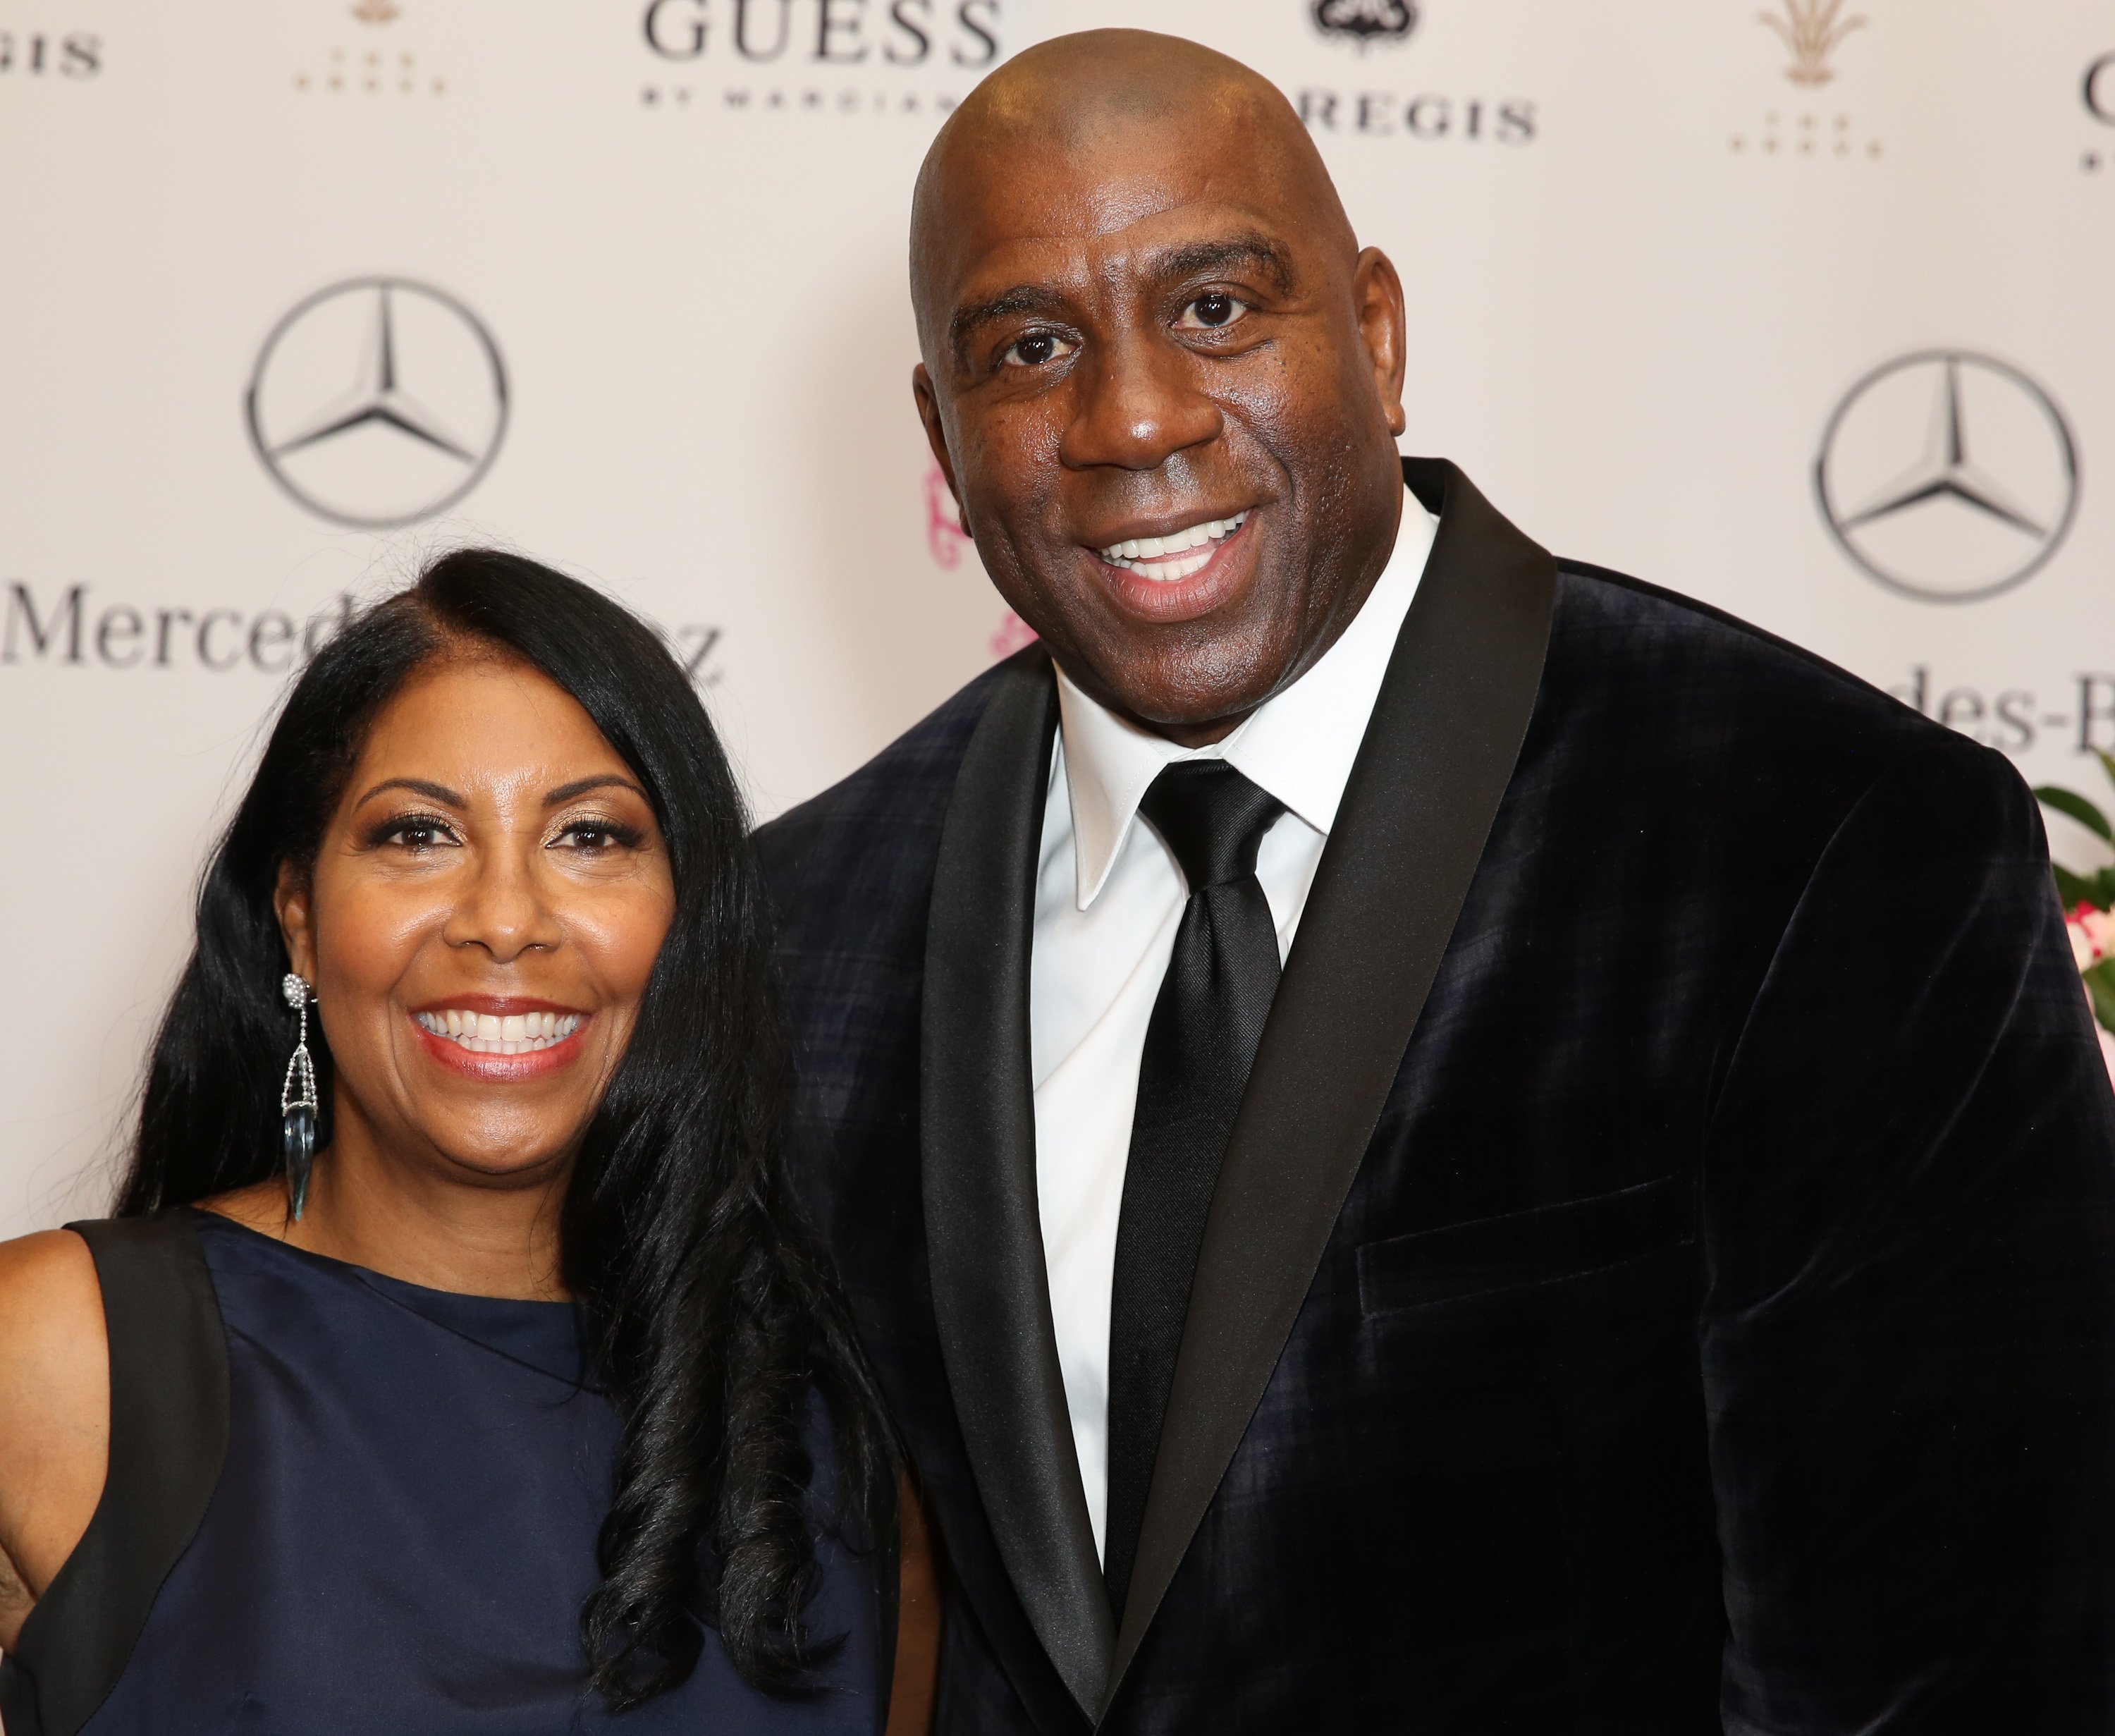 Magic and Cookie Johnson looking regal in black at a Mercedes Benz event held in Beverly Hills, California on October 11, 2014. | Photo: Getty Images. 